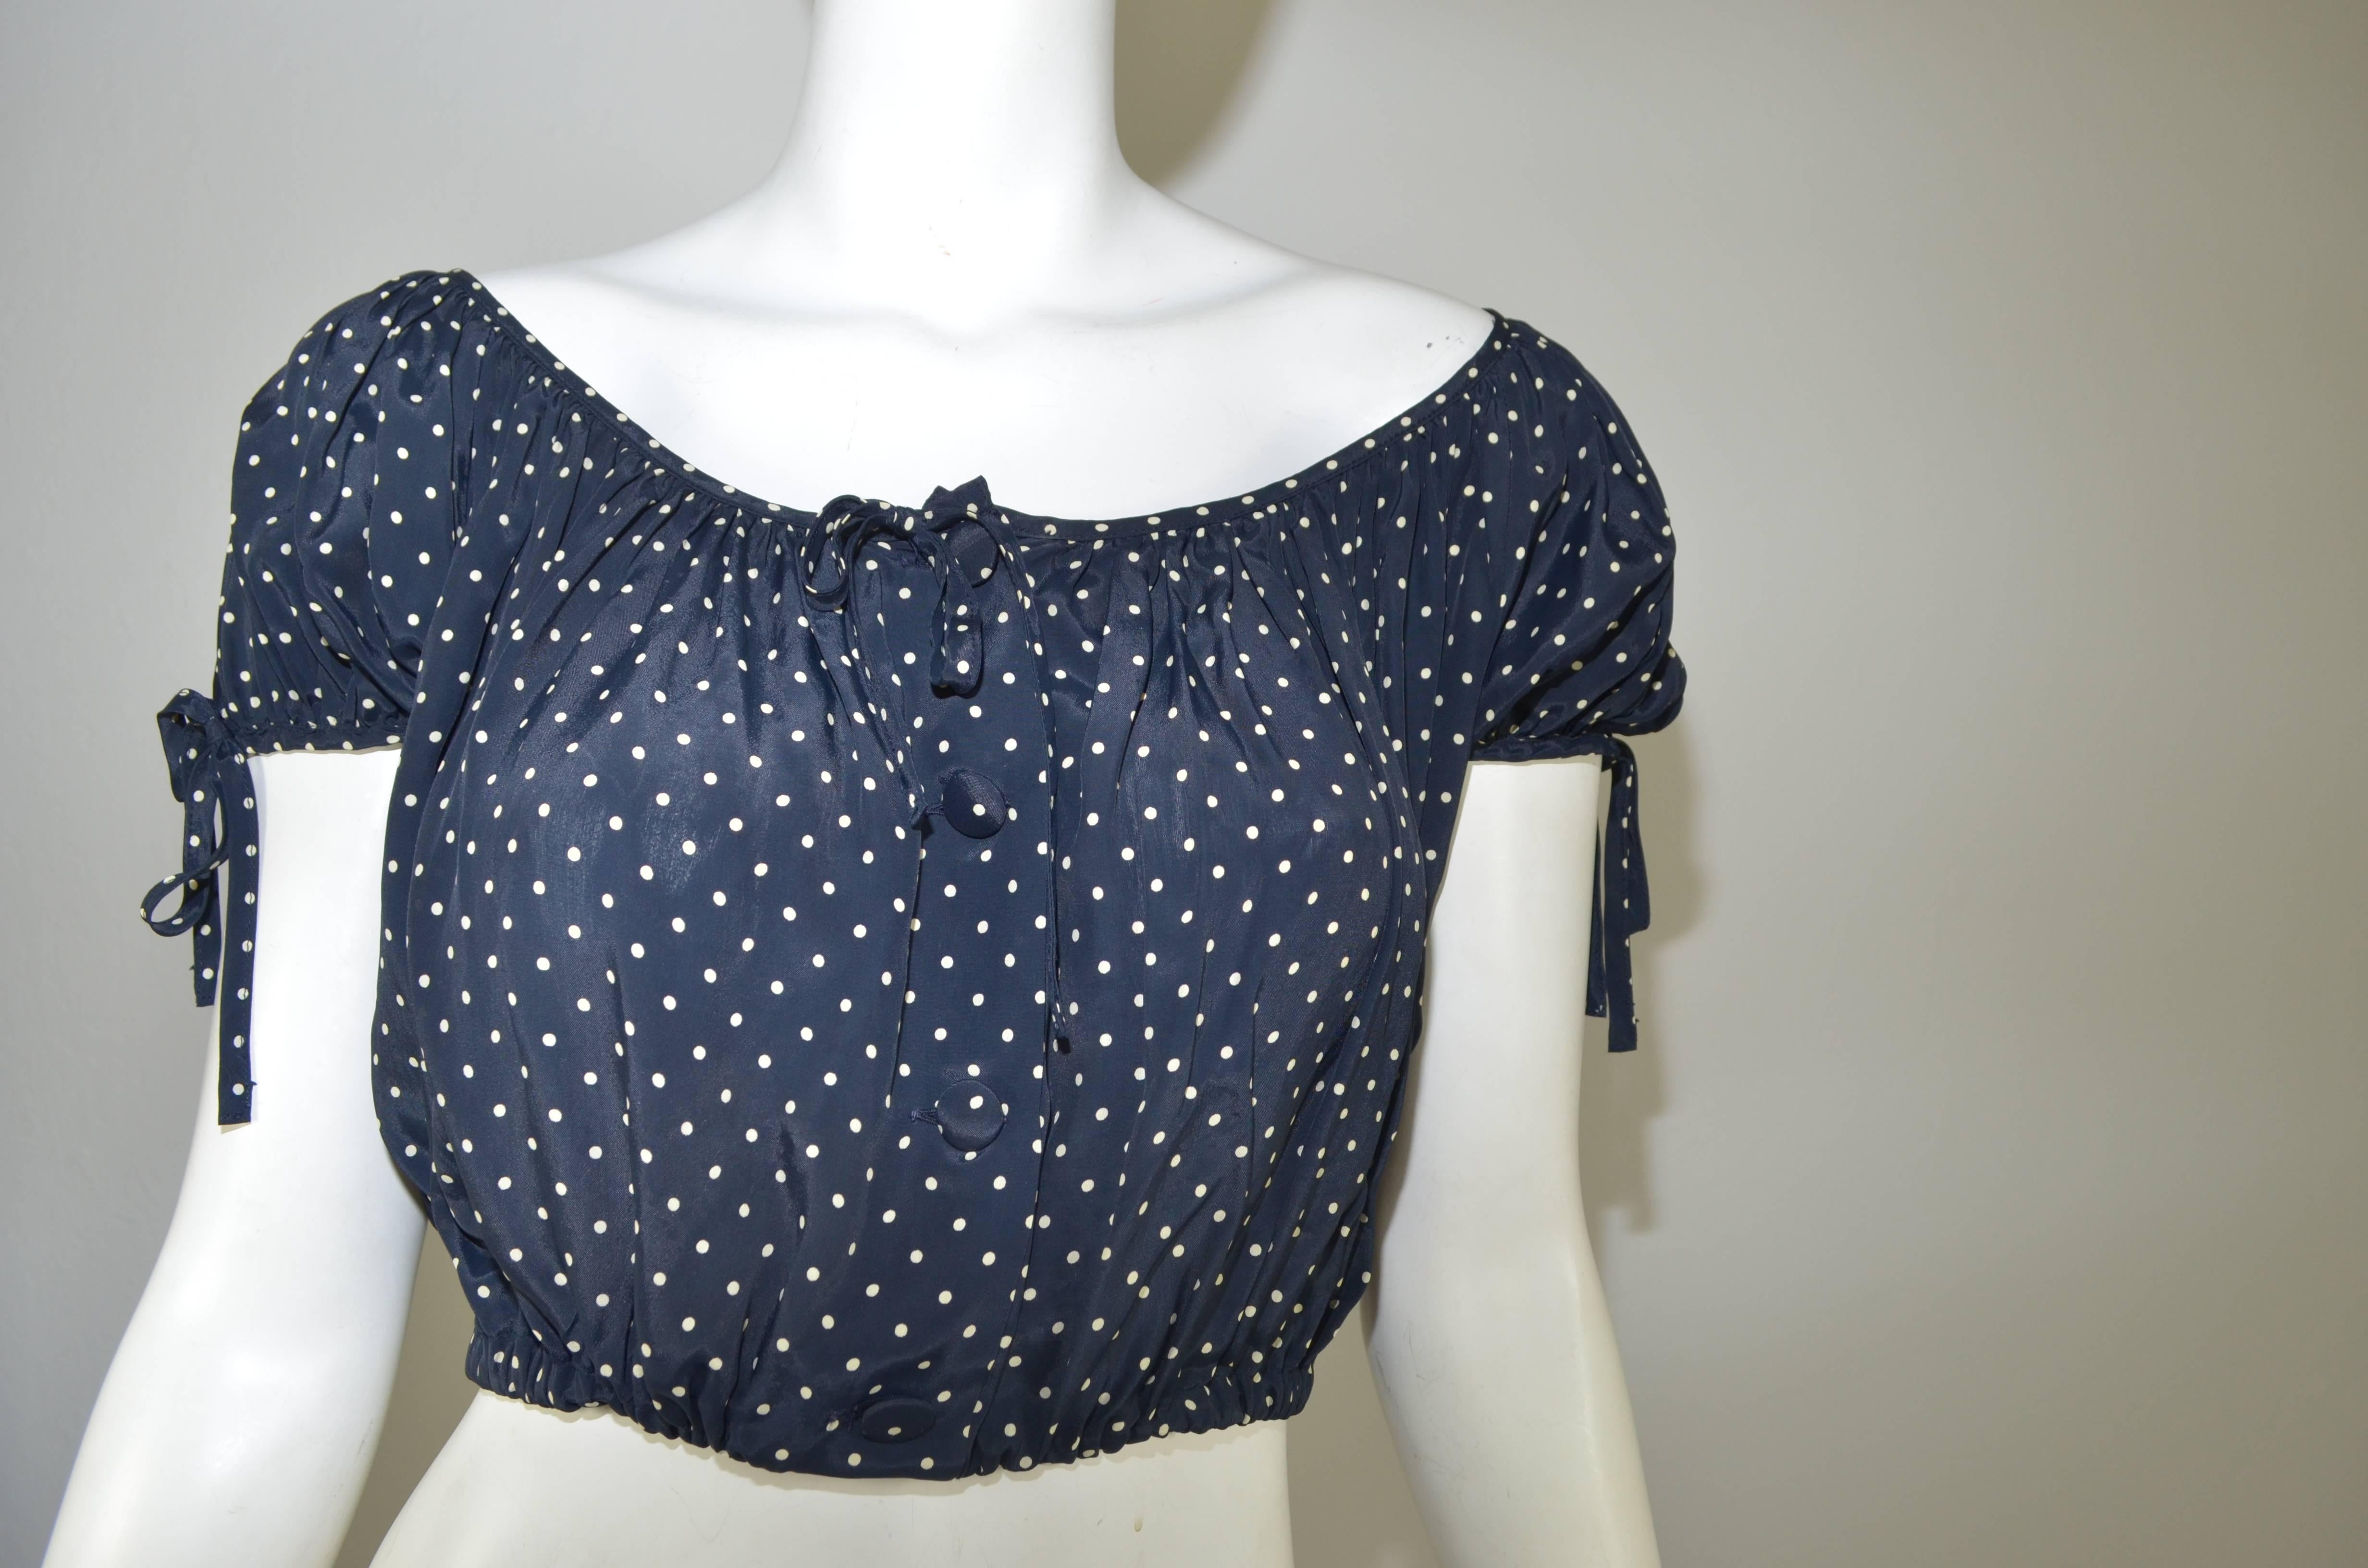 Moschino Cheap & Chic dark navy and white polka dot crop top peasant blouse made from 100% rayon with faux ties at sleeves and center front. Four working fabric covered buttons down front. Non opening bottom with elastic. Elastic at sleeve openings.